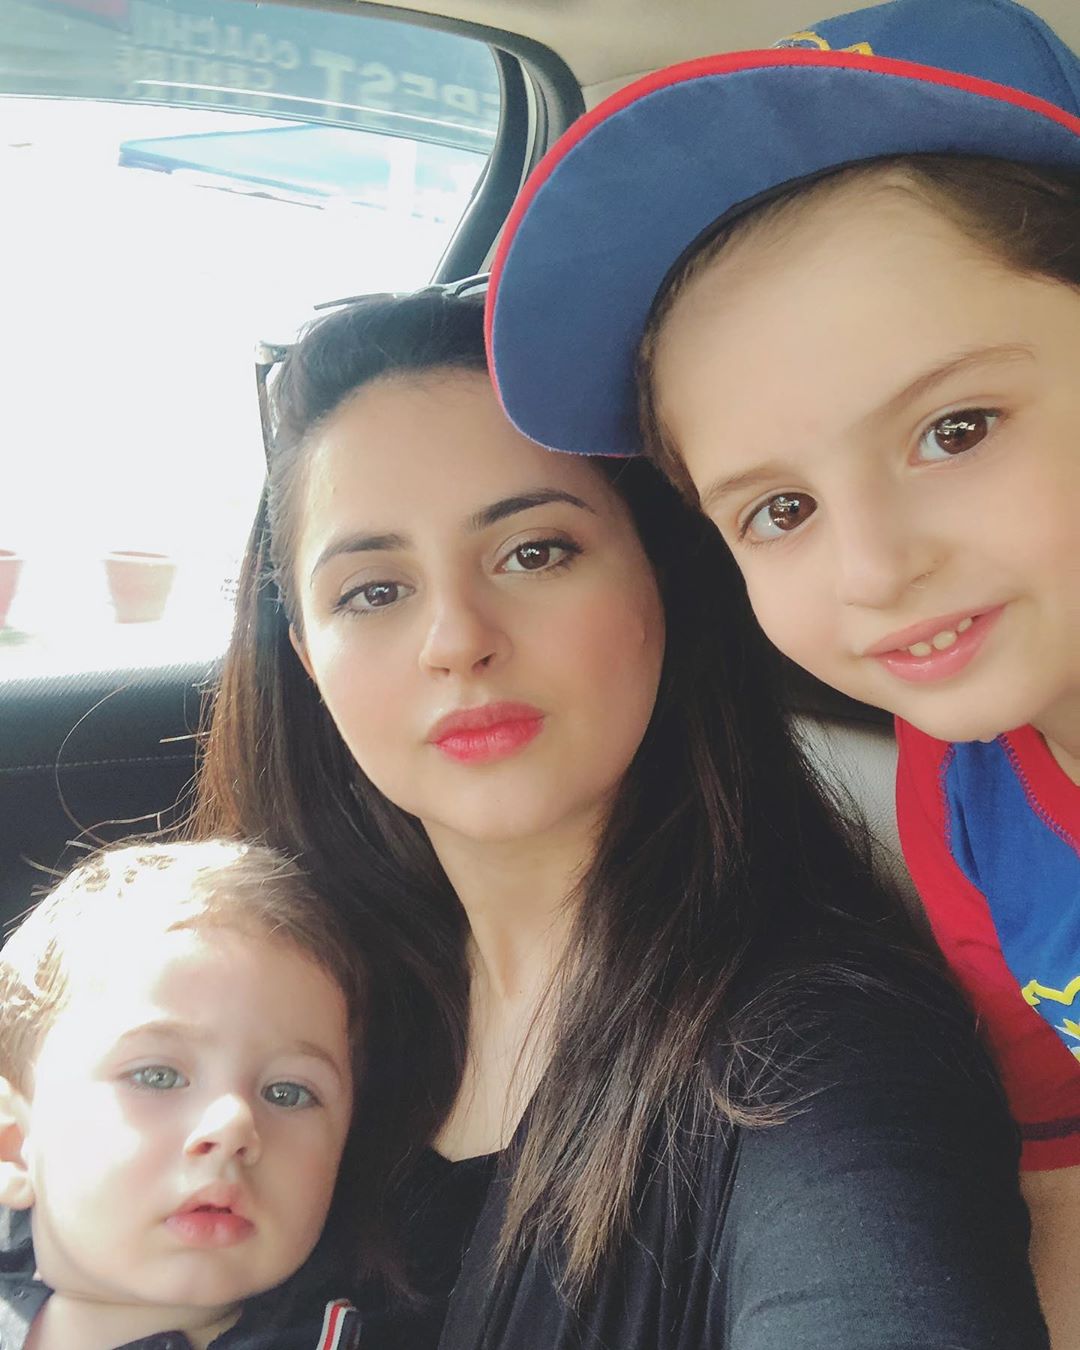 Fatima Effendi Latest Pictures with her Cute Sons Mahbir and Almir